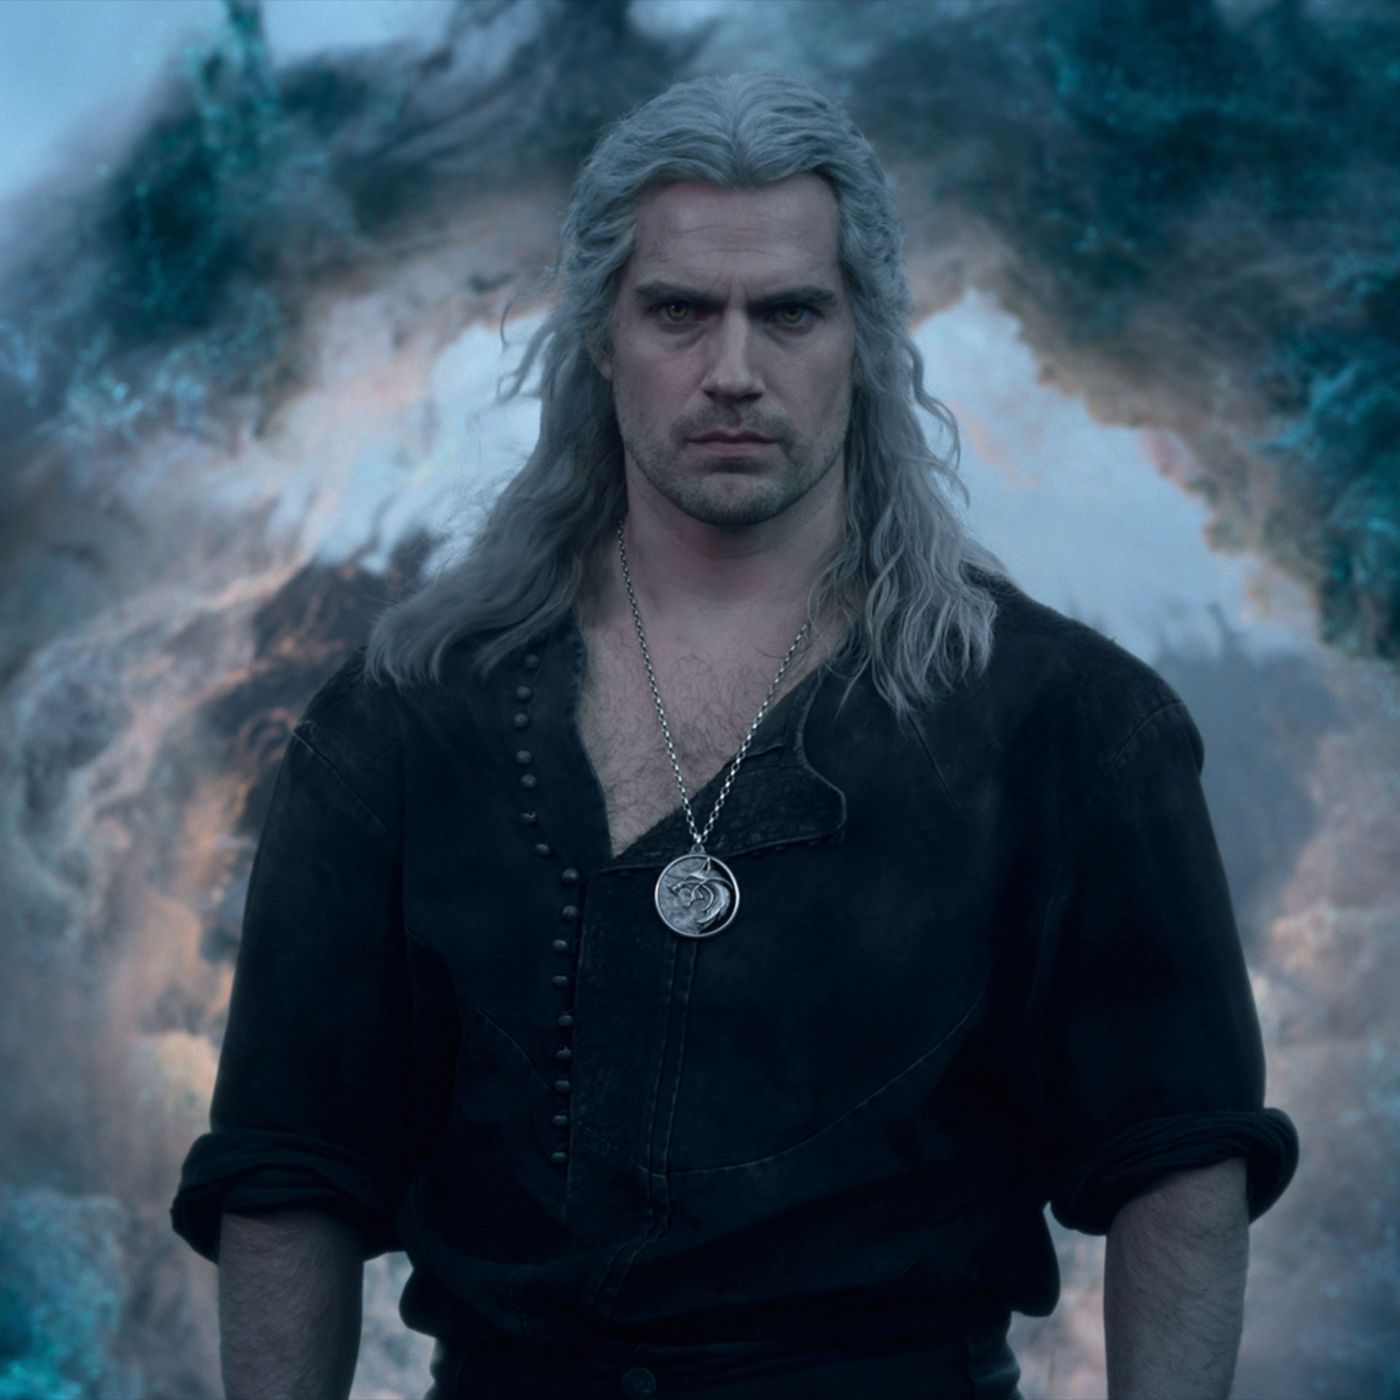 The Witcher producer reveals new details on Netflix series